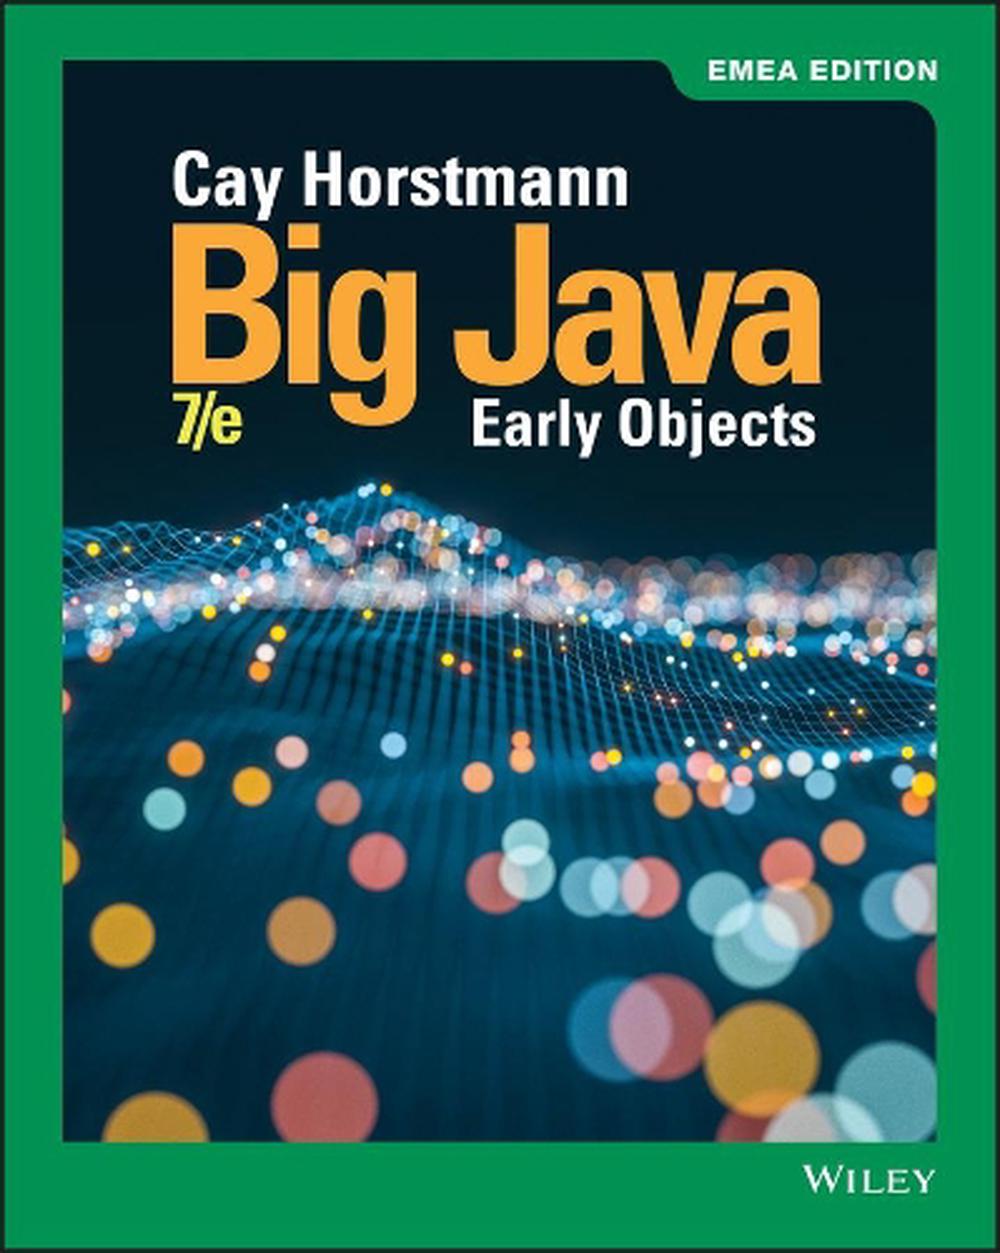 big java early objects fifth edition pdf